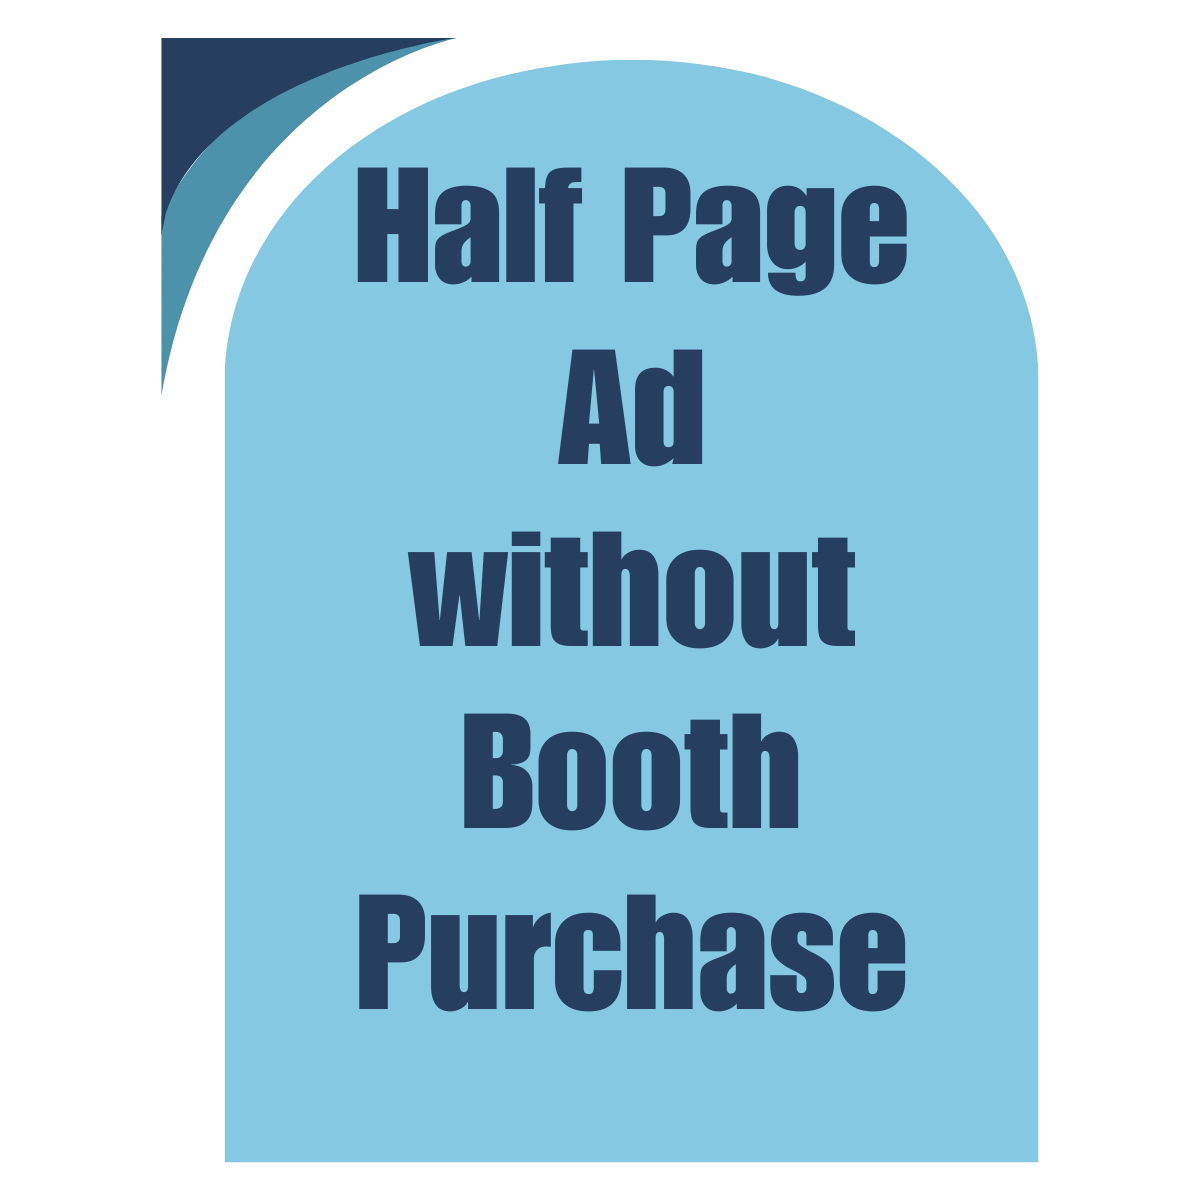 Half Page Ad Without Booth Purchase